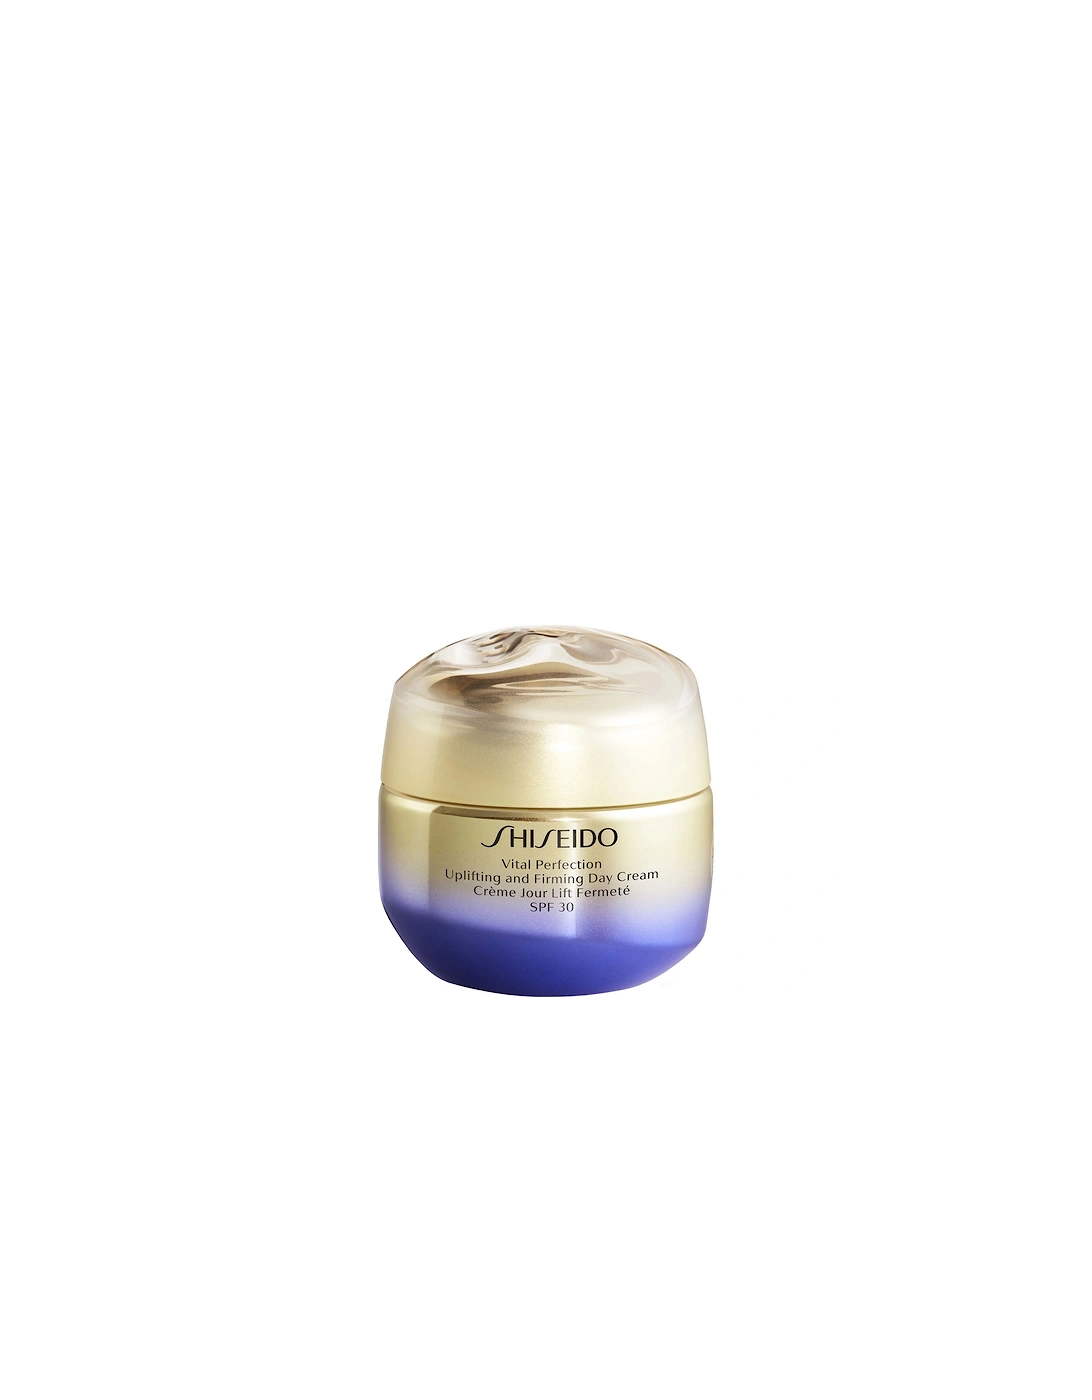 Vital Perfection Uplifting and Firming Day Cream SPF30 - Shiseido, 2 of 1